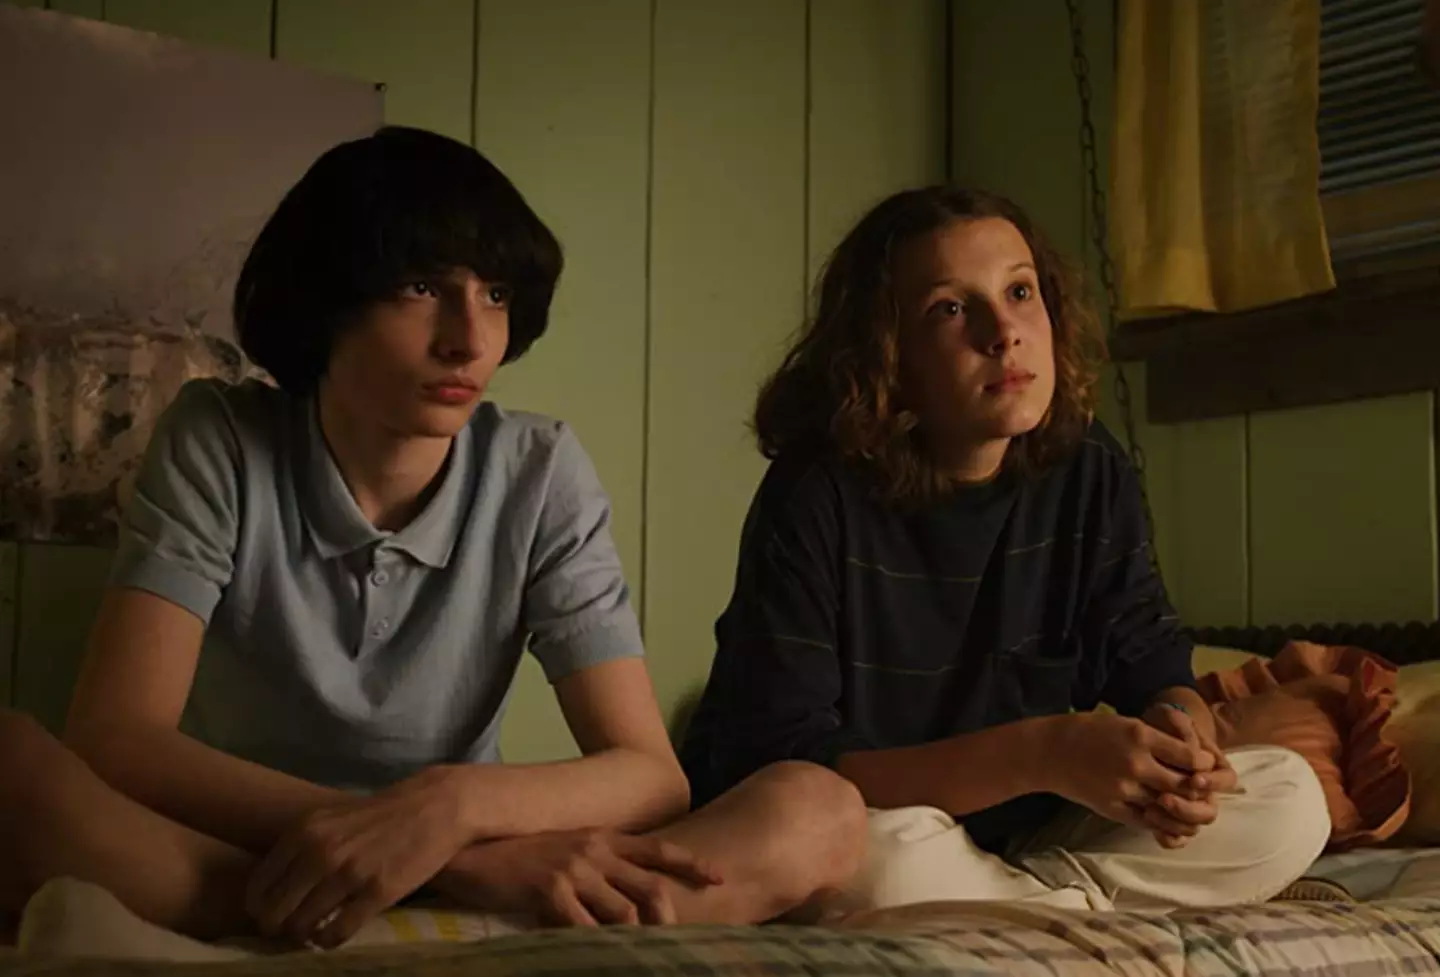 Finn Wolfhard with on-screen girlfriend Millie Bobby Brown.